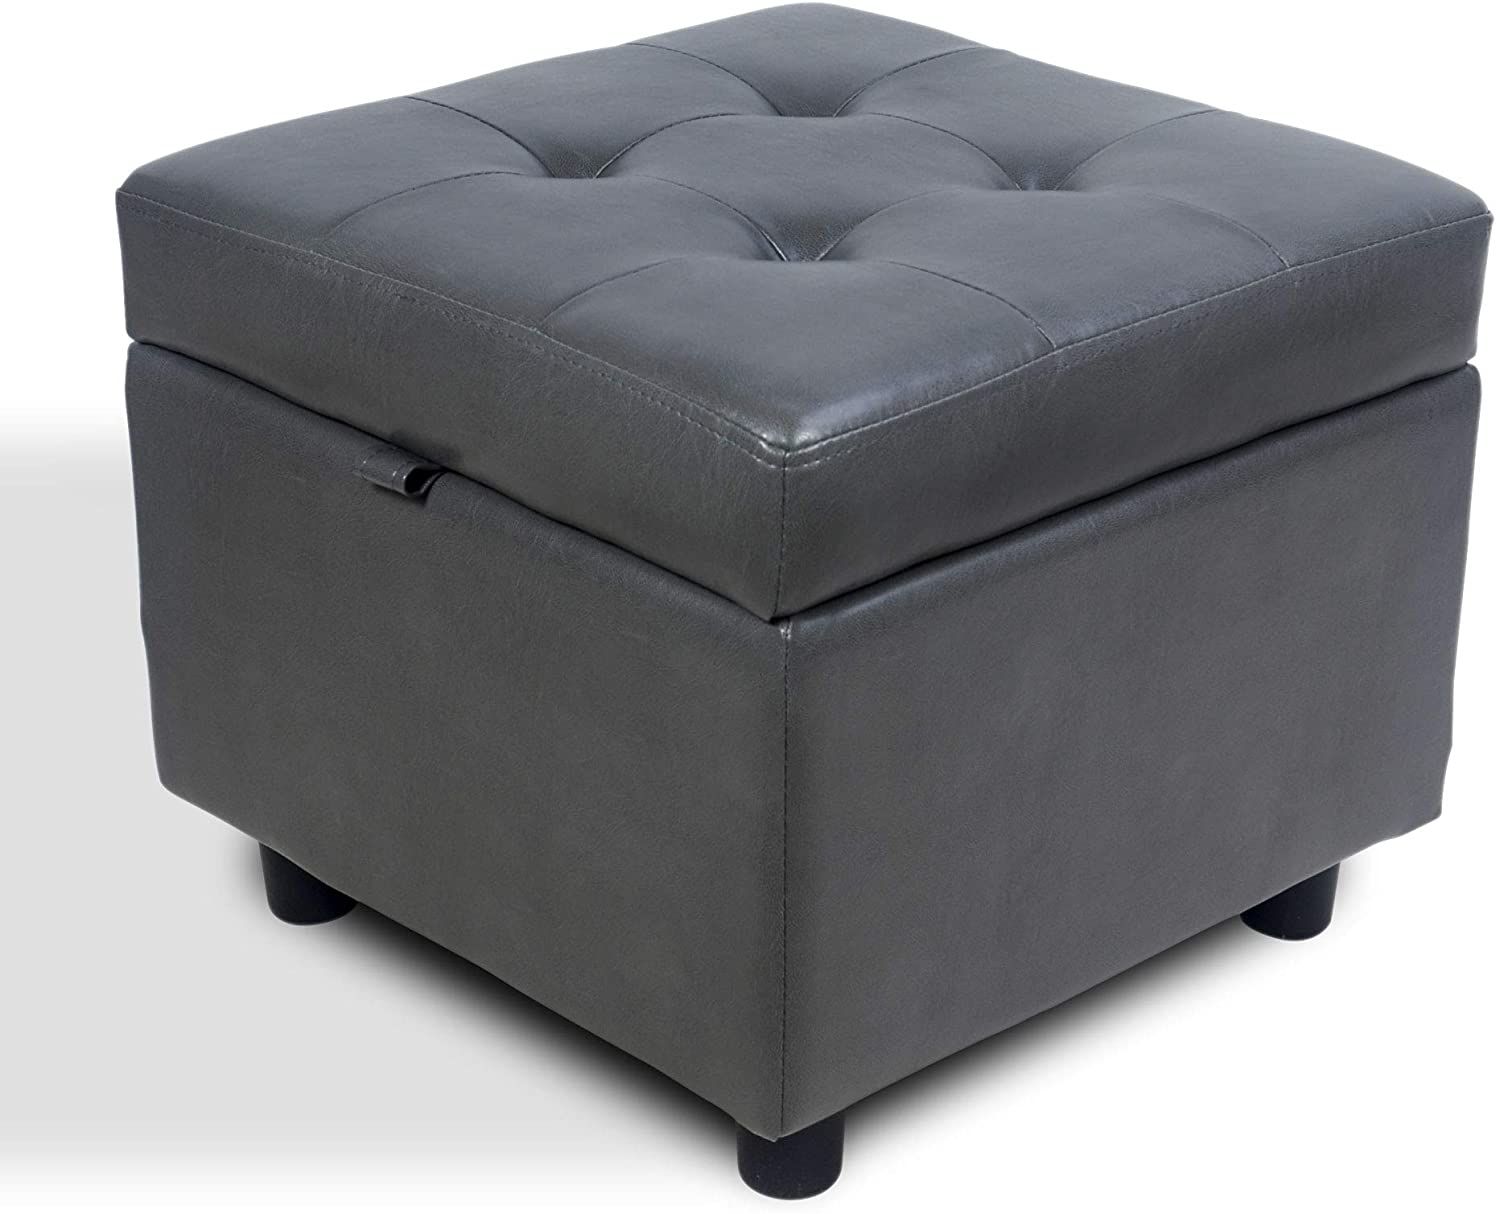 Tufted Leather Square Ottoman With Storage And Hinged Lid, Foot Rest Throughout Square Cube Ottomans (View 2 of 20)